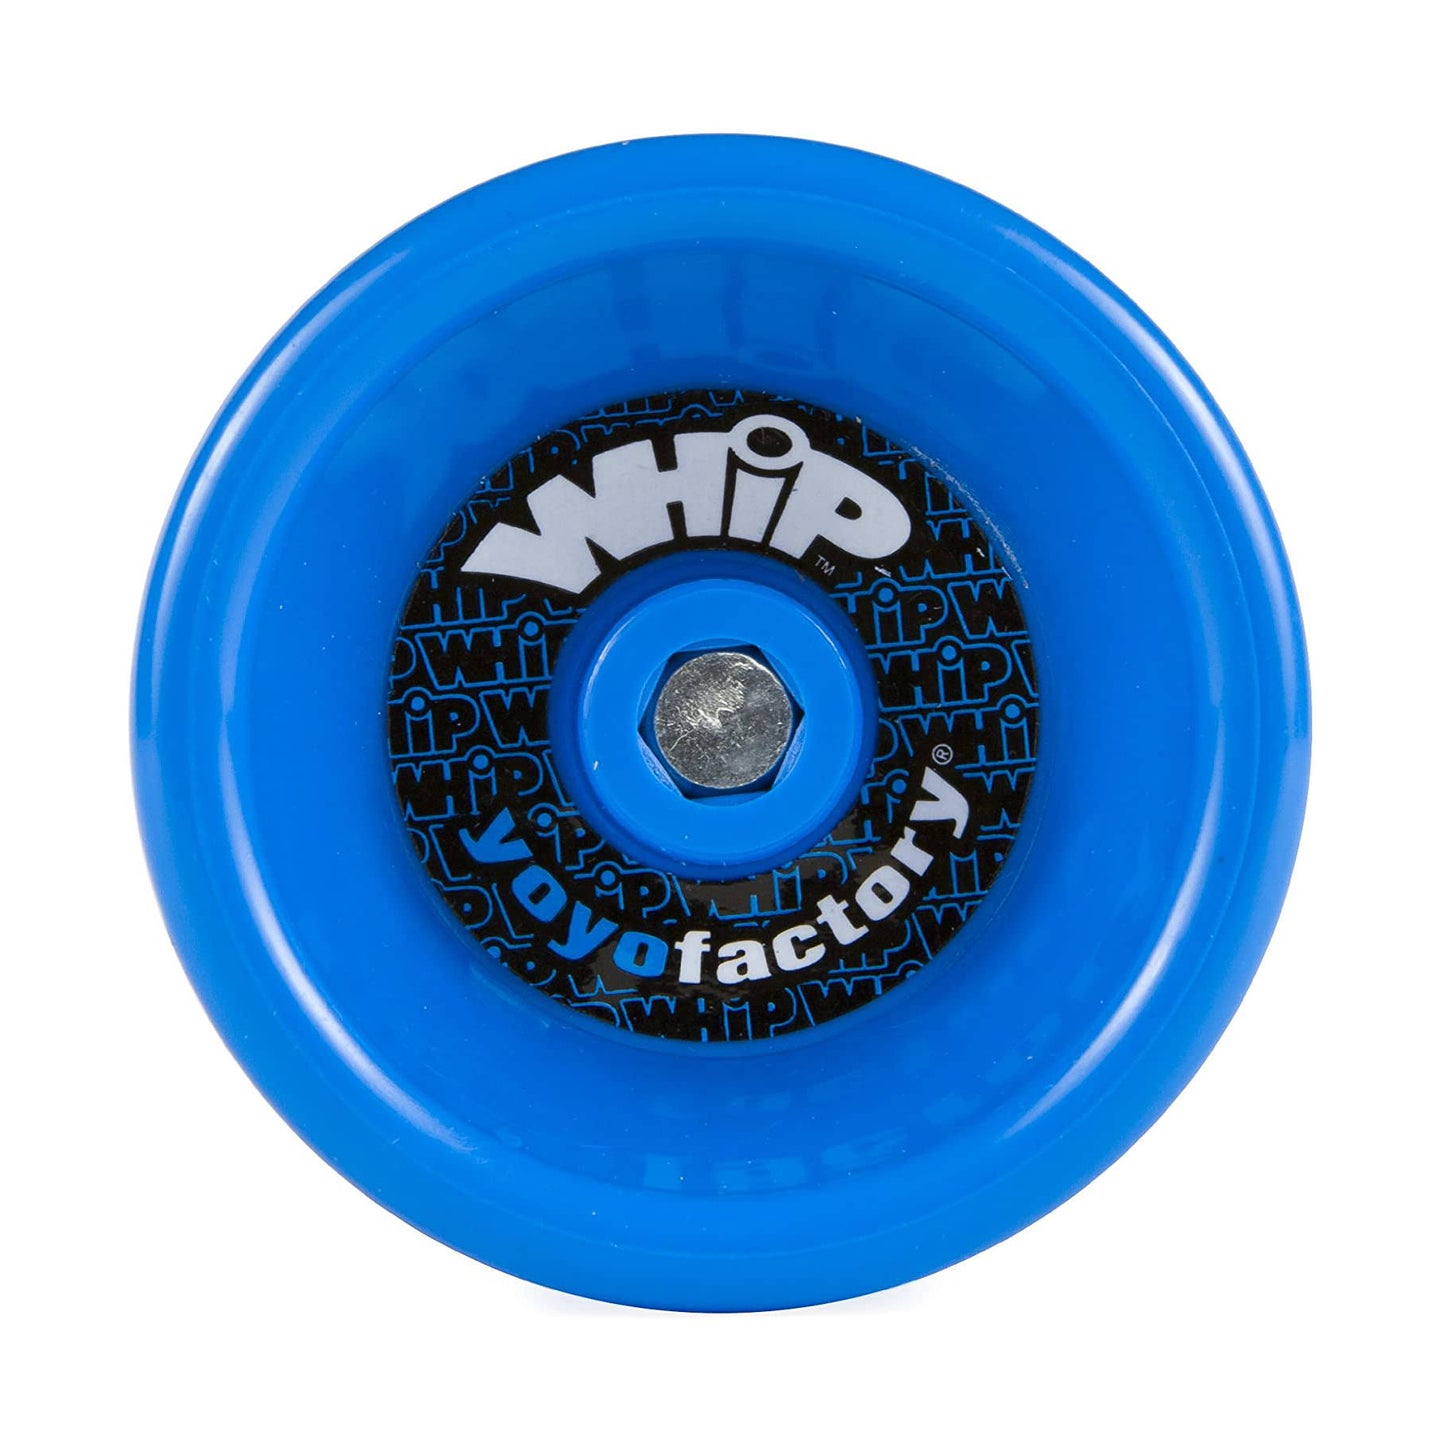 Whip YoYo blue side view